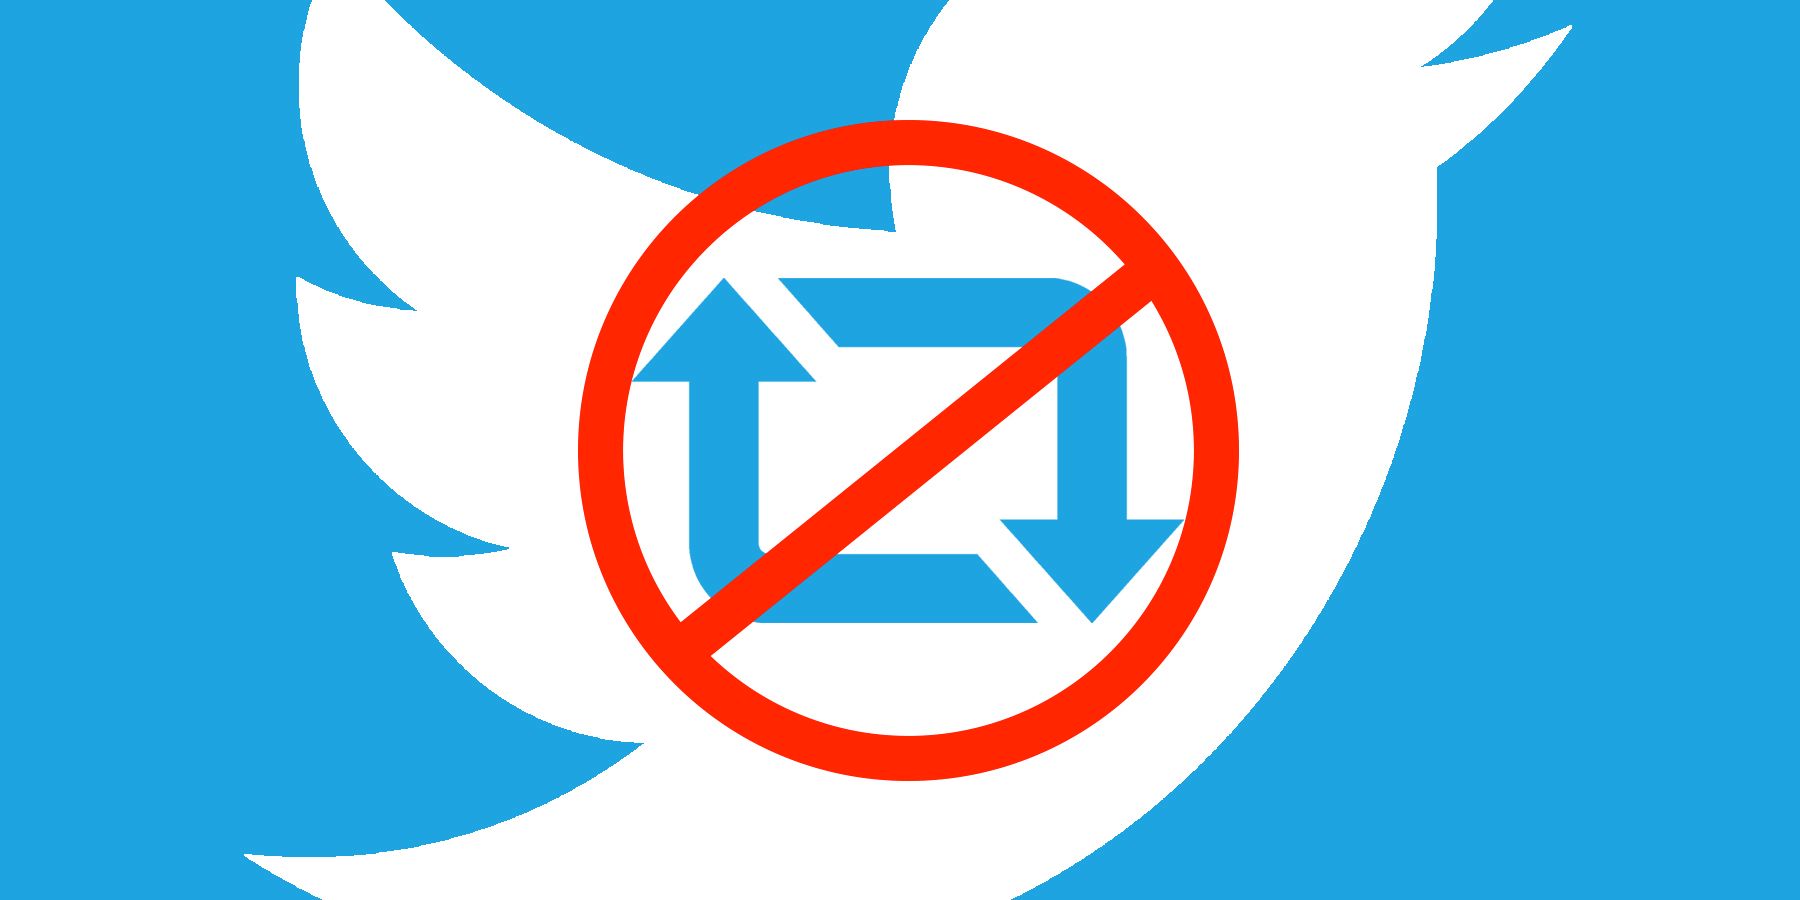 A twitter retweet symbol with a circle cross overlaid.